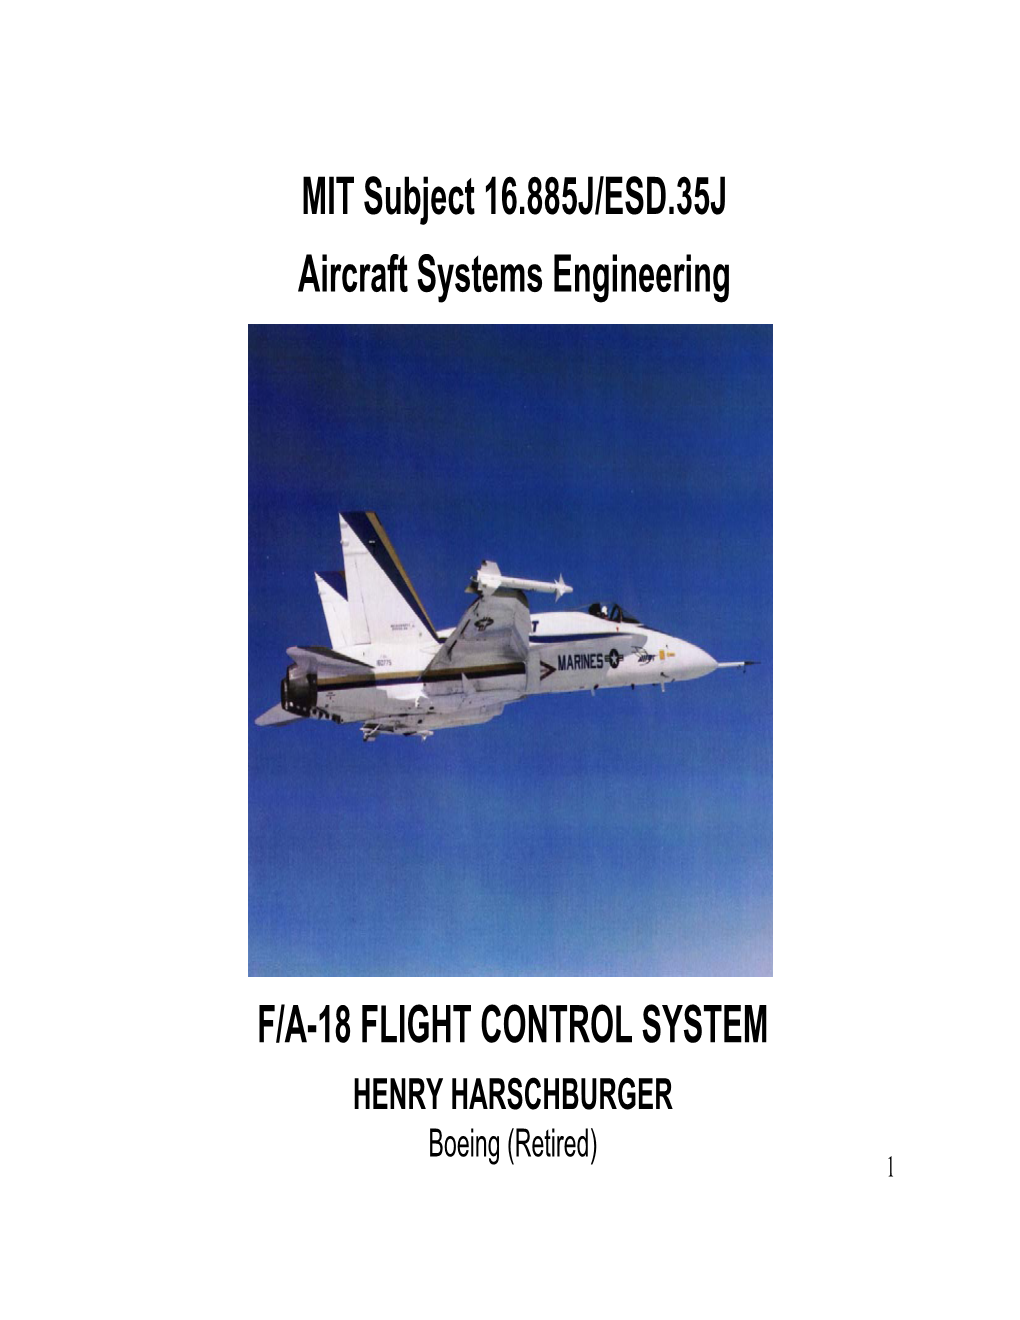 Flight Control Systems for Tactical Military Aircraft